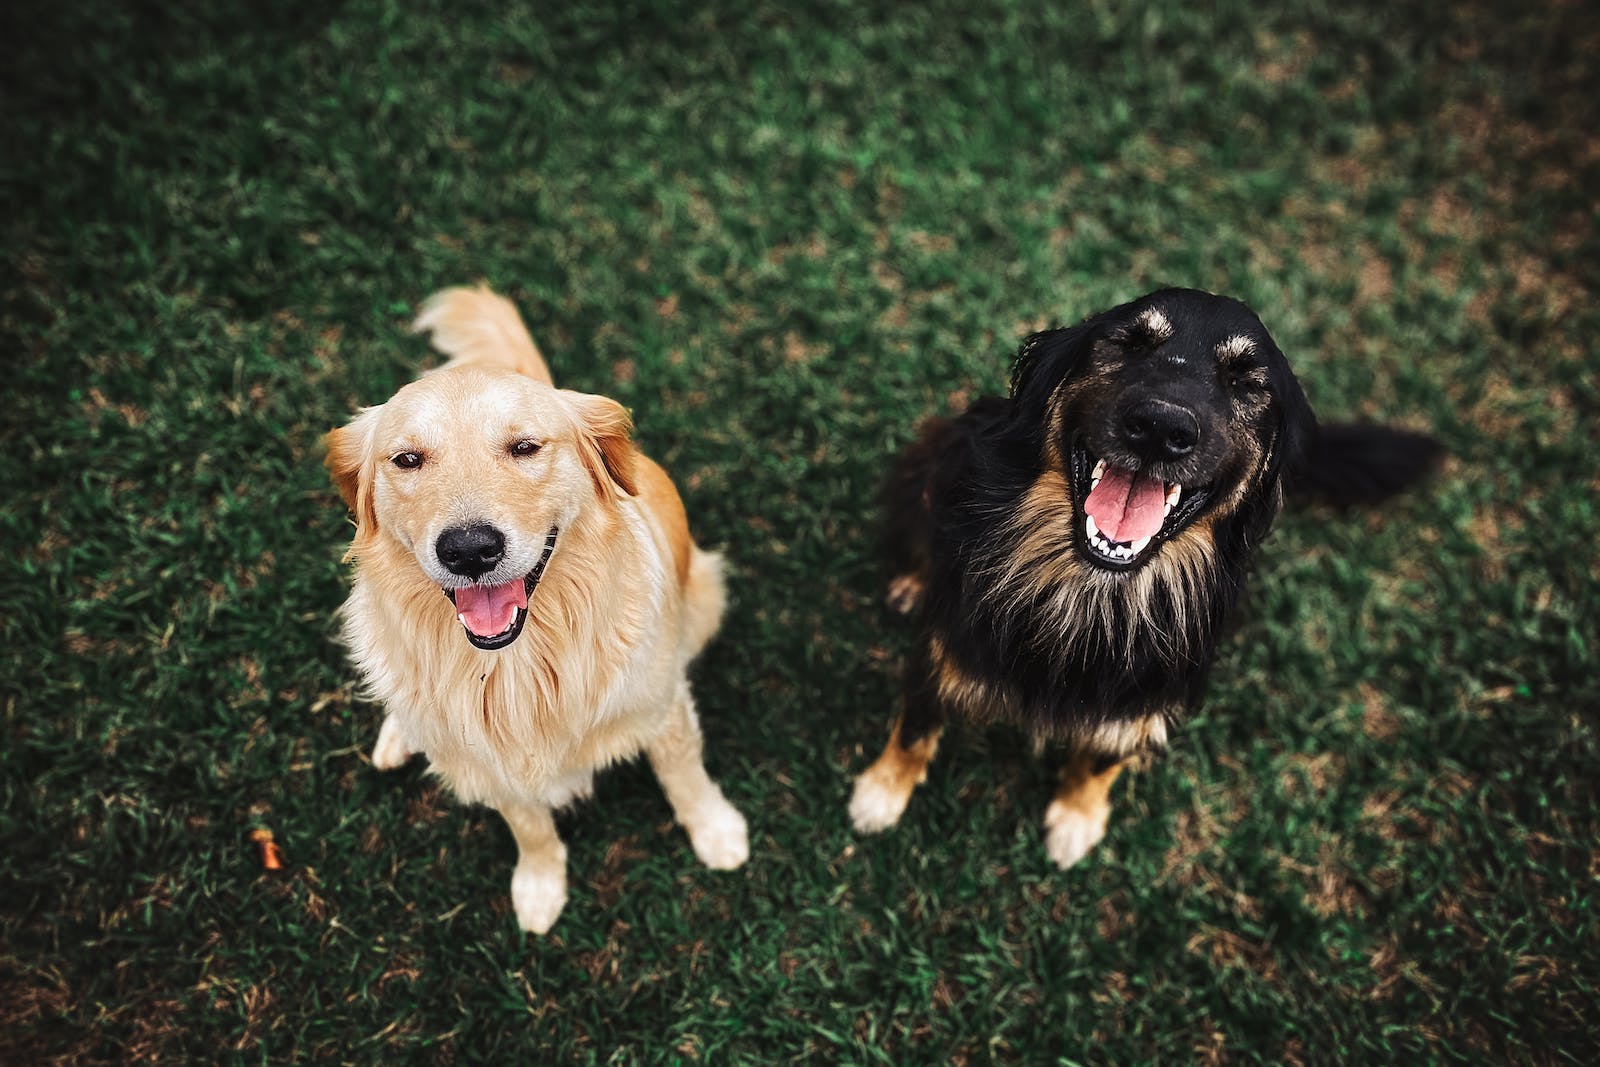 Dogs in a park smiling